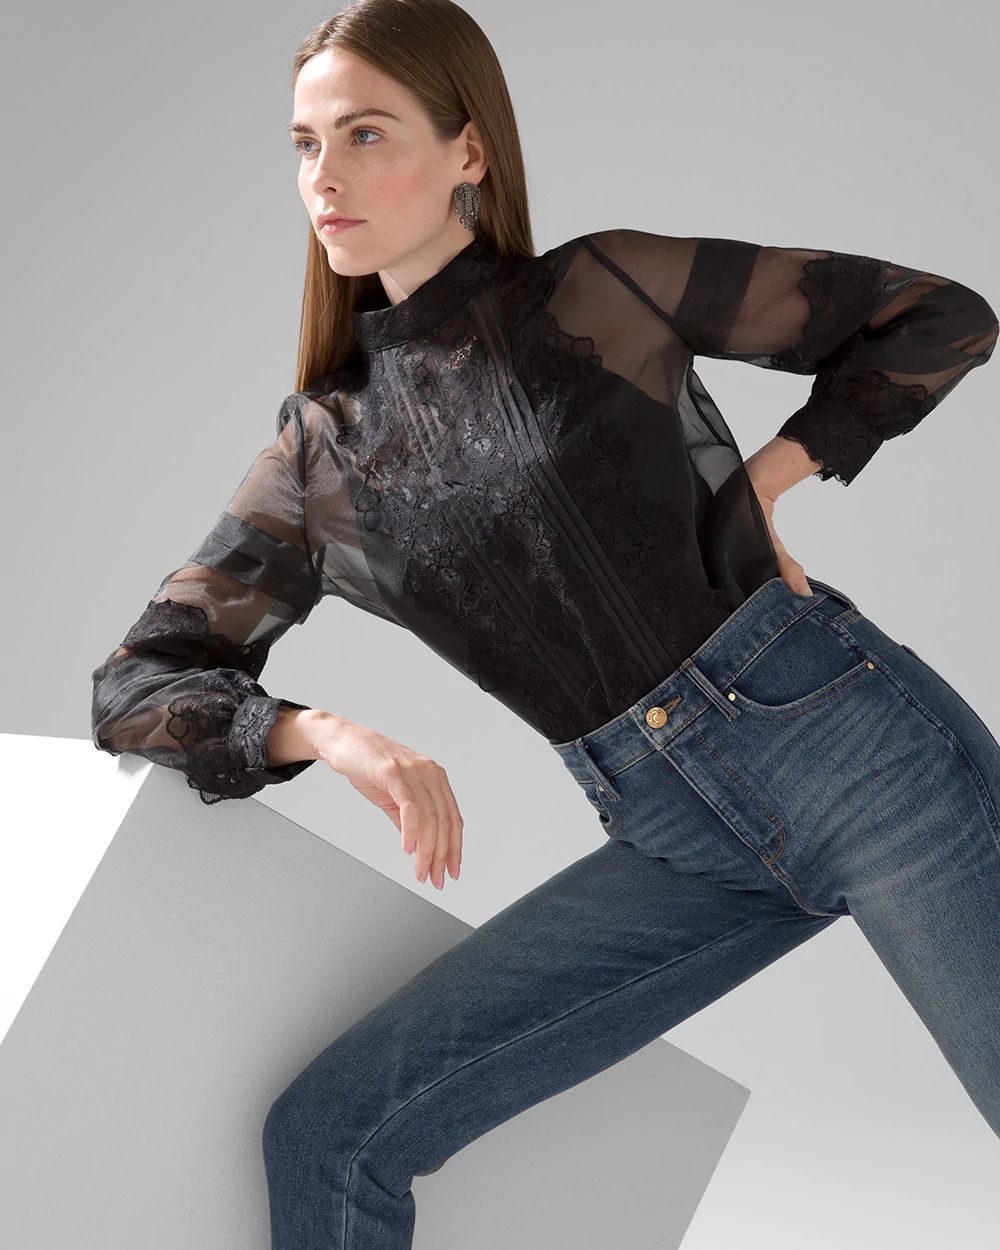 Organza Lace Trimmed Blouse click to view larger image.